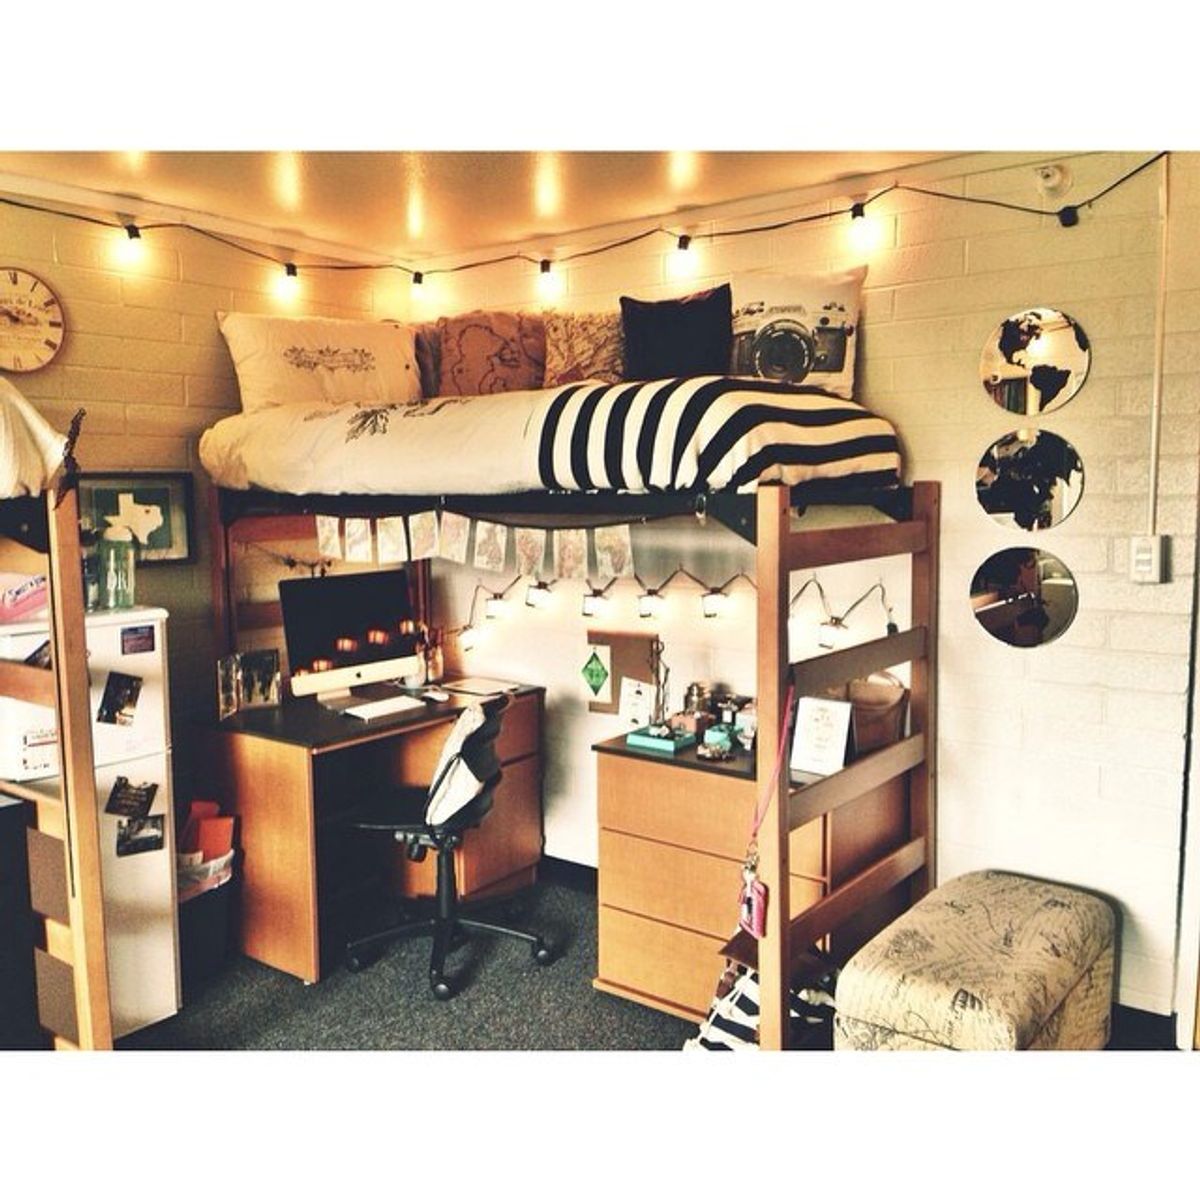 11 Signs You're Ready To Go Back To College